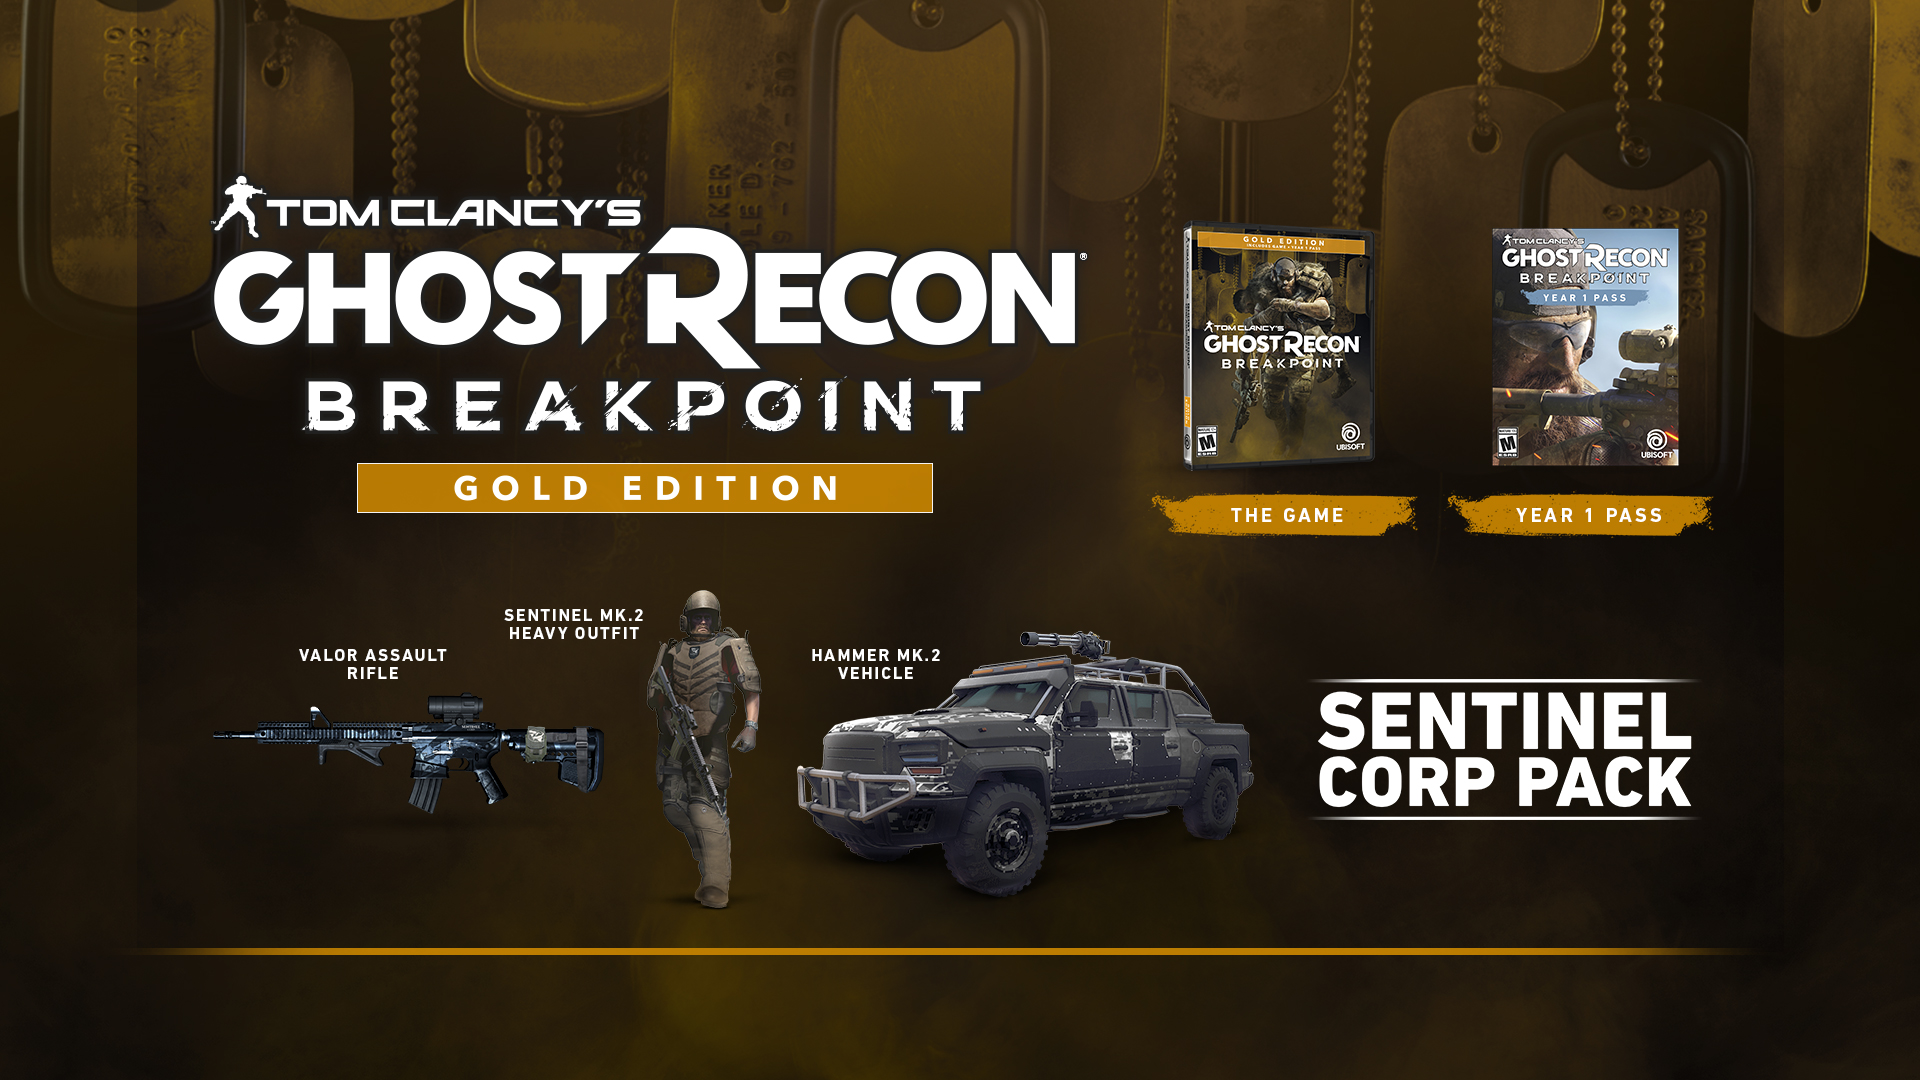 Recon gold. Ghost Recon breakpoint Gold Edition. Ghost Recon breakpoint Gold Edition что входит. Сравнение Deluxe Edition и Голд эдишн gost Recon breakpoint. First encounter Assault Recon обои.